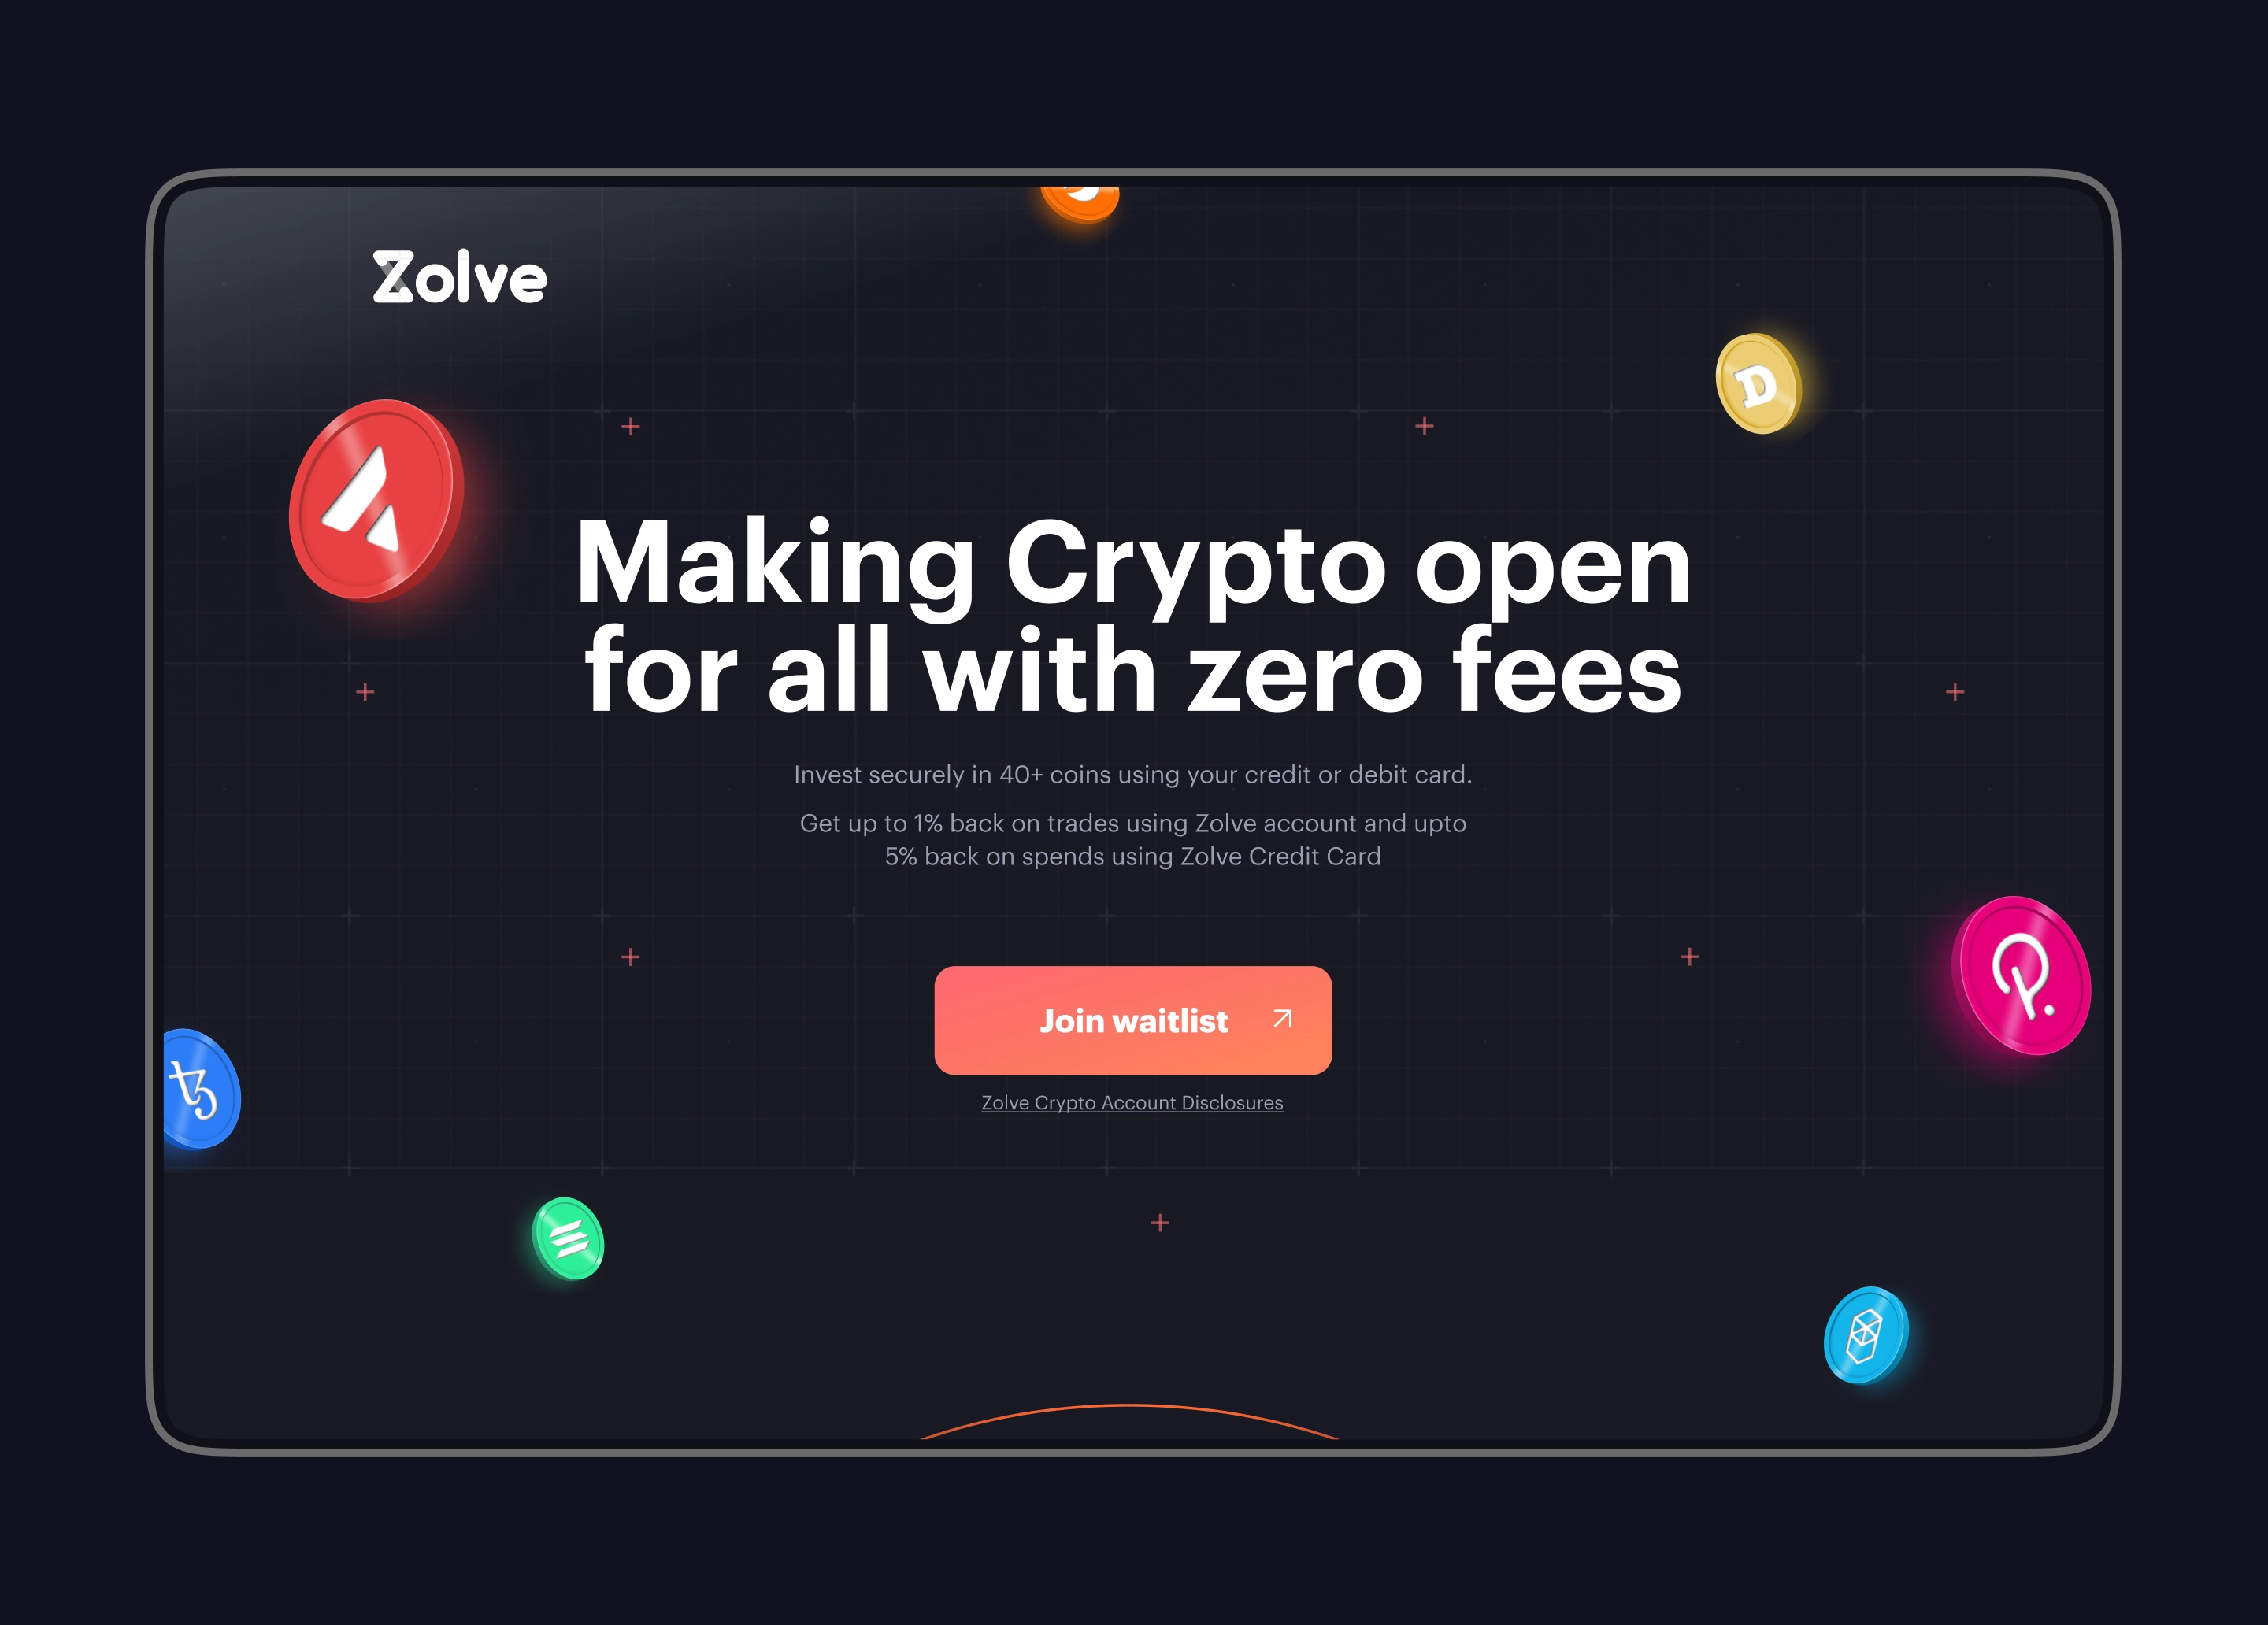 landing page for zolve’s crypto offerings